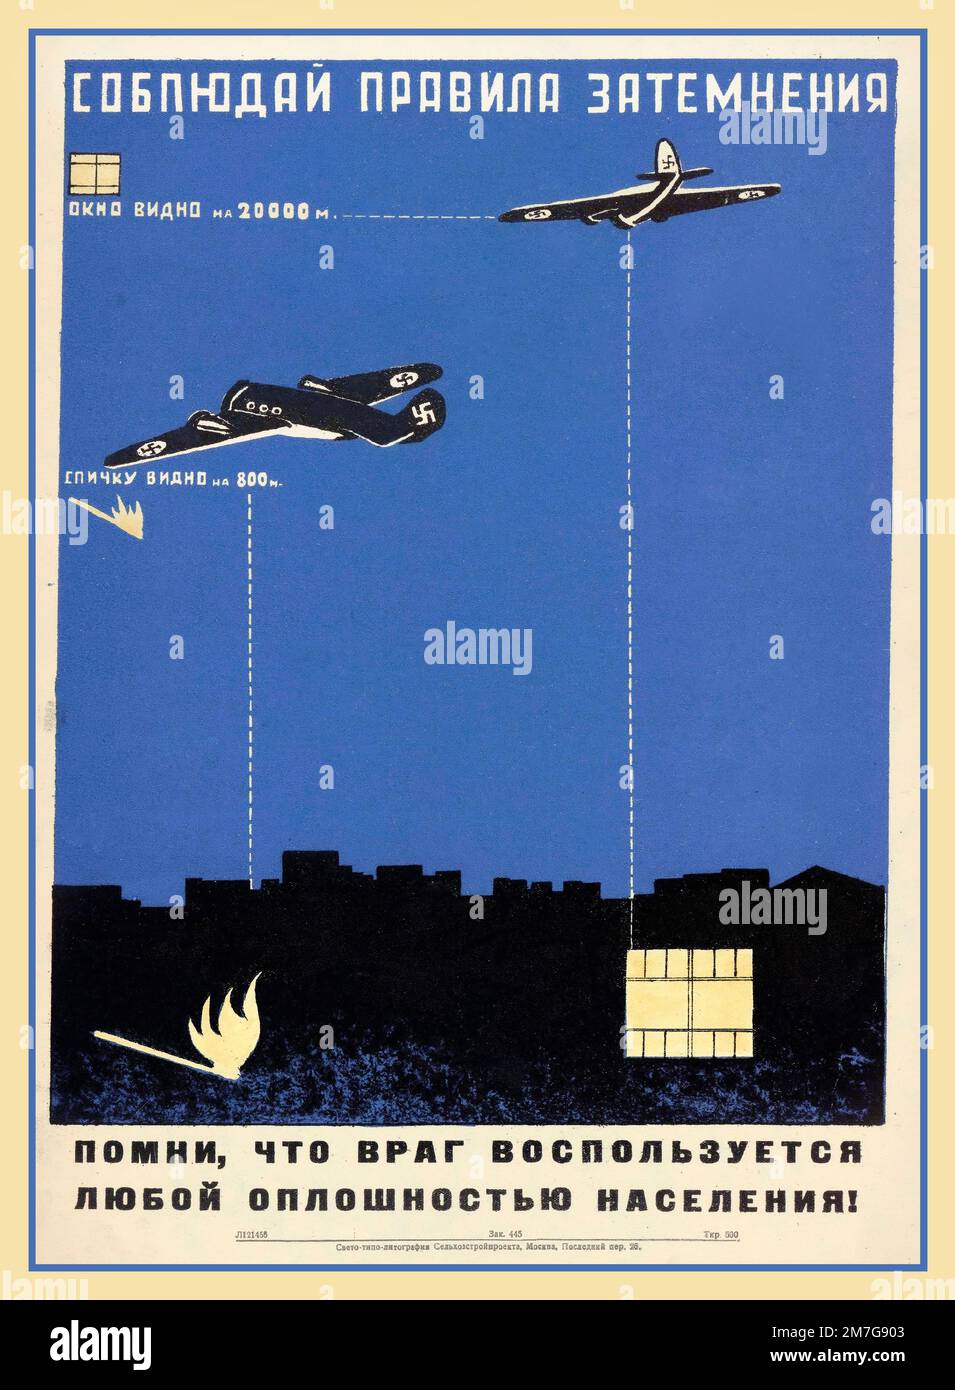 WW2 USSR BLACKOUT Soviet Russian Information Propaganda Poster 'Follow the blackout rules. Remember that the Nazi Germany enemy will take advantage of any oversight of the population!'   Nazi Germany Invasion  [poster]. - [Moscow]:  [1941] (Moscow: Svetotipolitografiya Selkhozstroyproekt). – Color Lithograph World War II Stock Photo